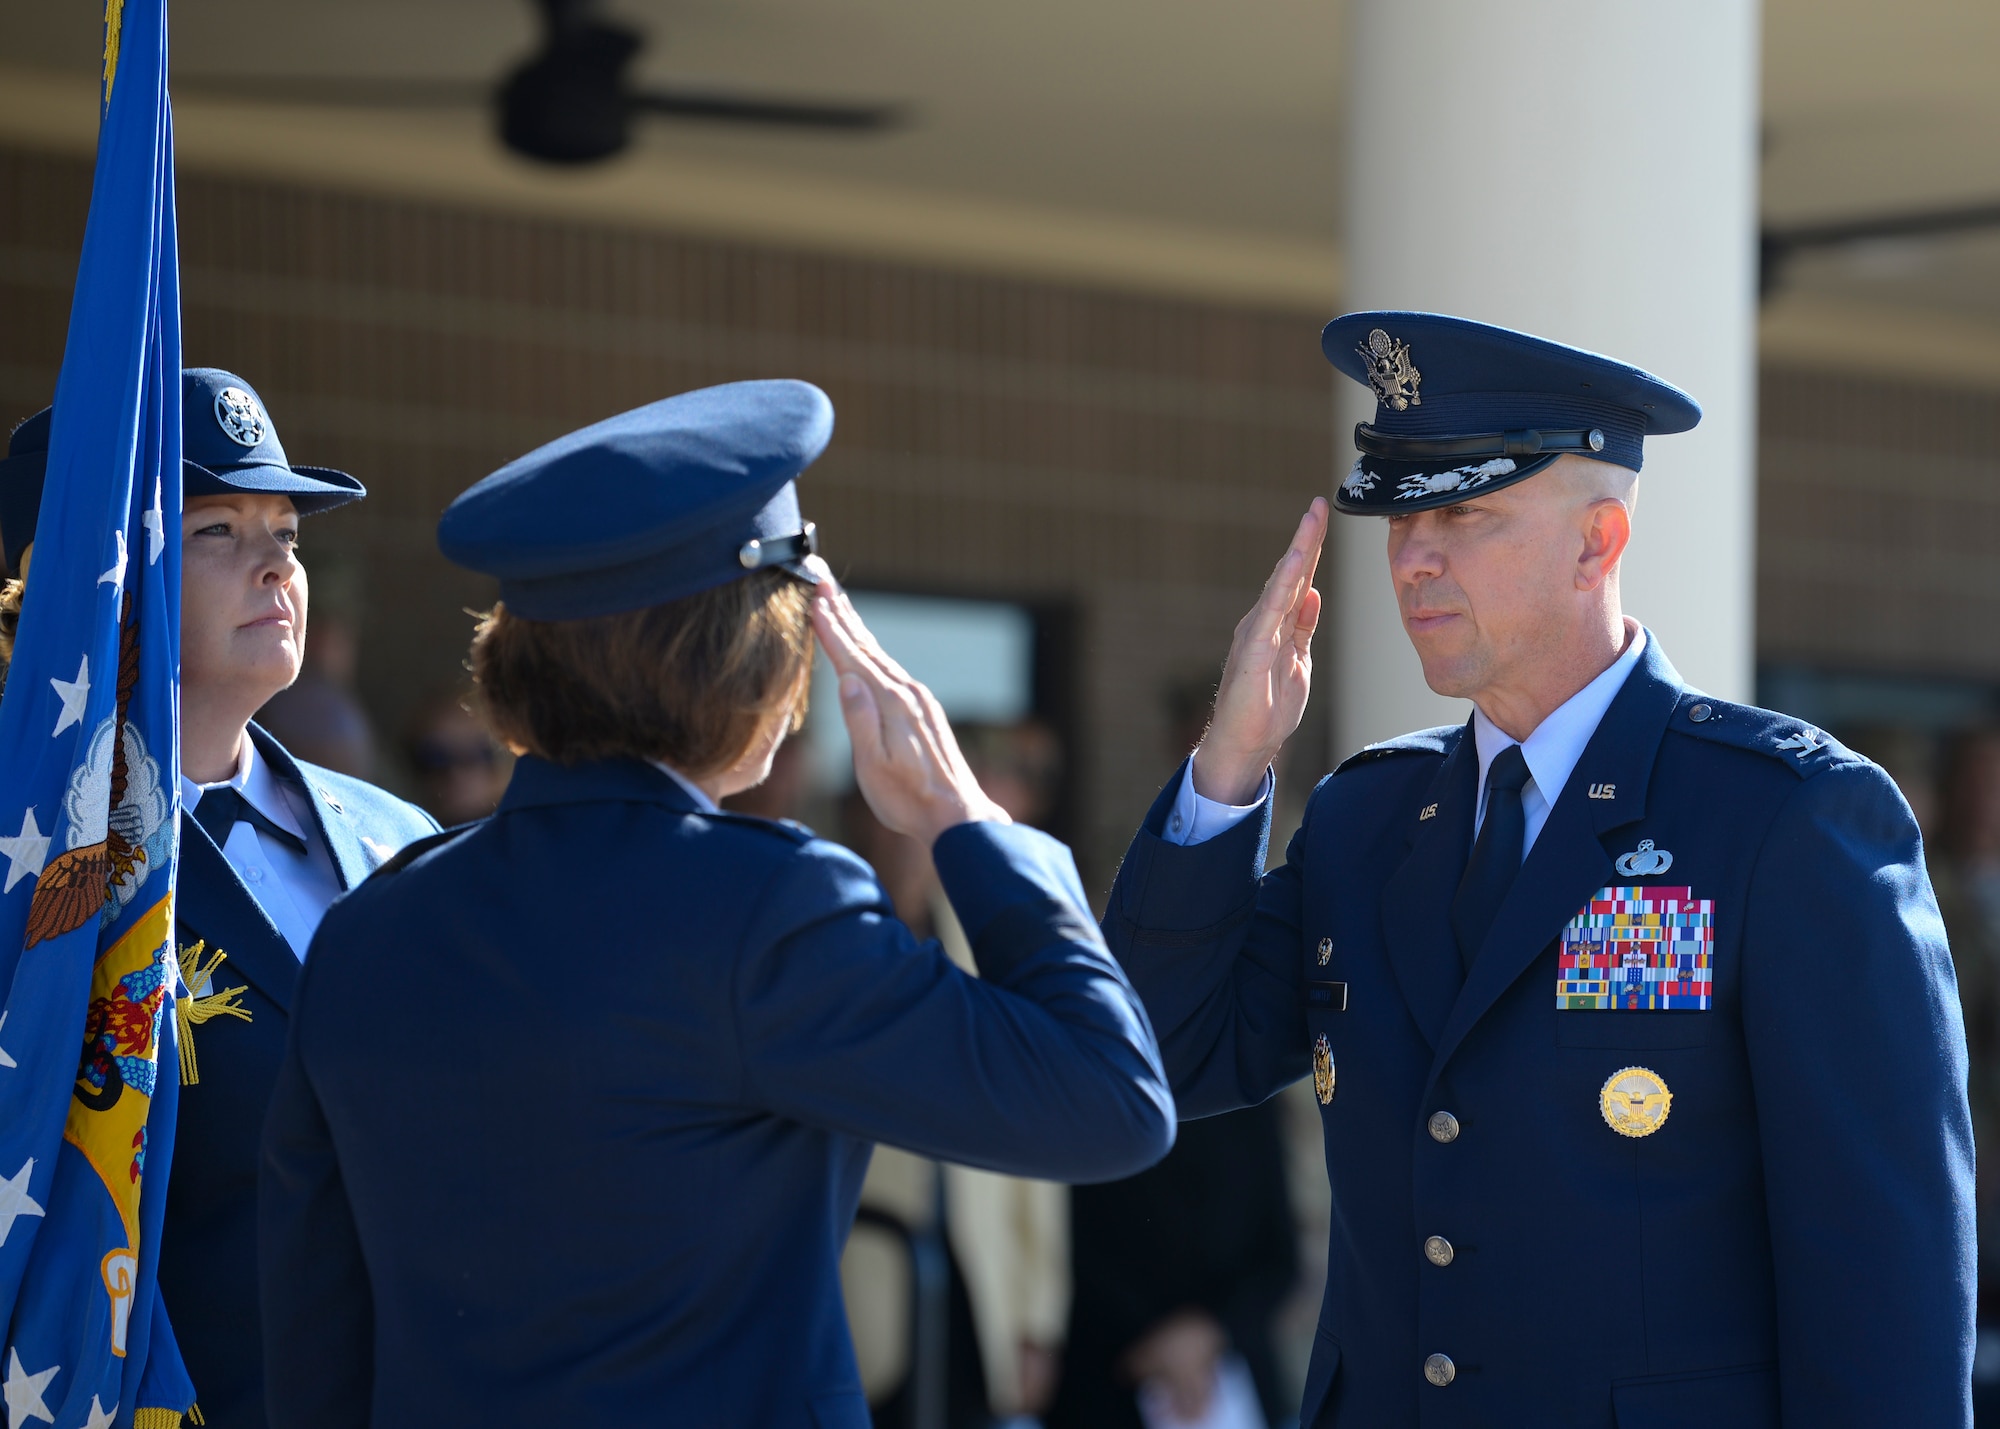 U.S. Air Force Col. William Hunter, 81st Training Wing commander, salutes Maj. Gen. Andrea Tullos, Second Air Force commander, during the change of command ceremony on the Levitow Training Support Facility drill pad at Keesler Air Force Base, Mississippi, June 17, 2021. The ceremony is a symbol of command being exchanged from one commander to the next by the handing-off of a ceremonial guidon. Hunter assumed command of the 81st TRW from Col. Heather Blackwell. (U.S. Air Force photo by Senior Airman Spencer Tobler)